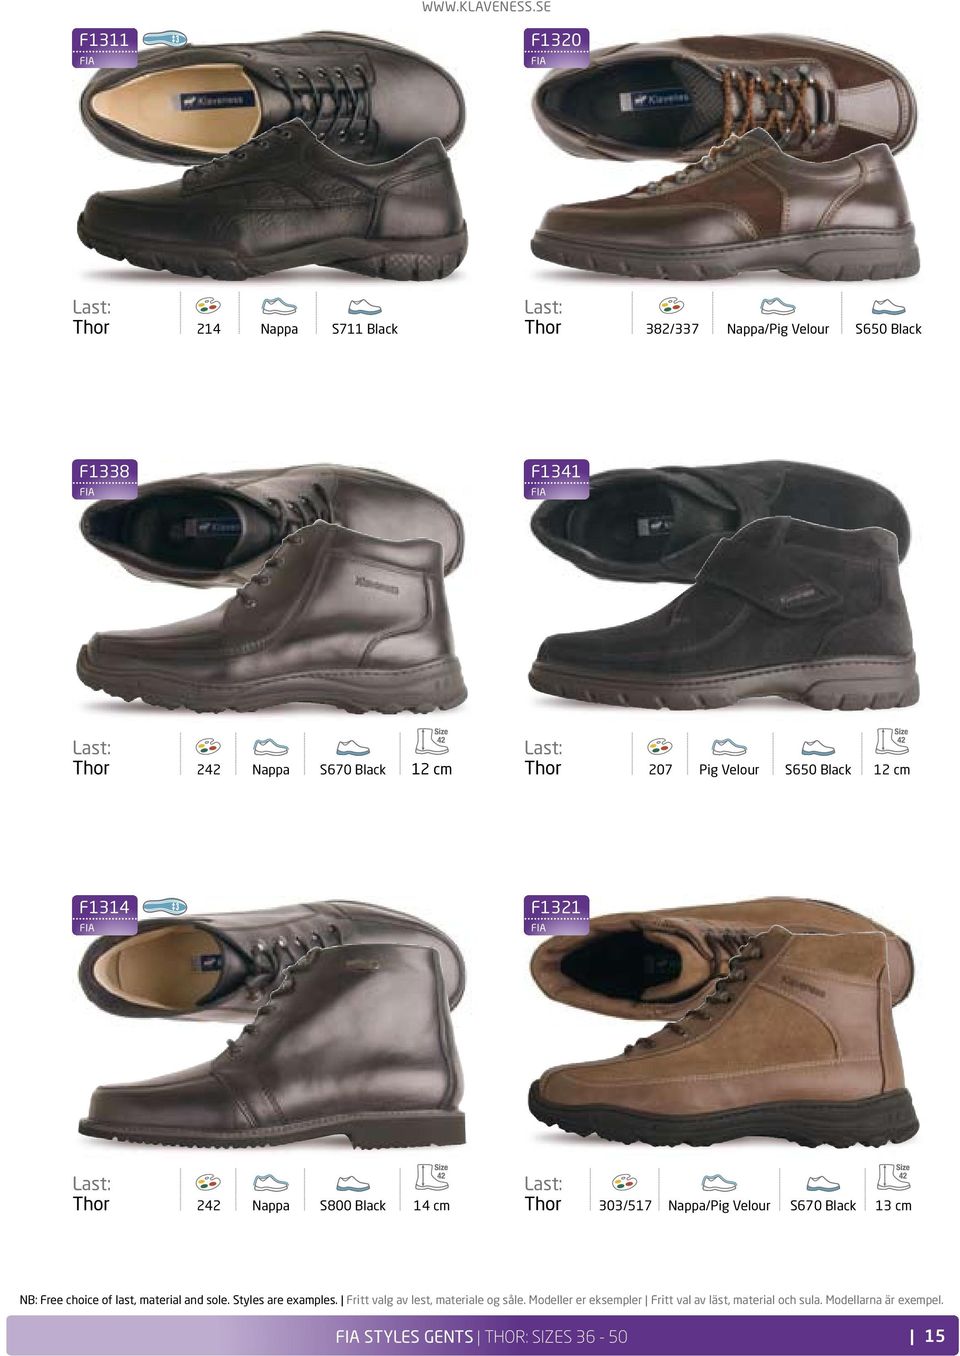 choice of last, material and sole. Styles are examples. Fritt valg av lest, materiale og såle.